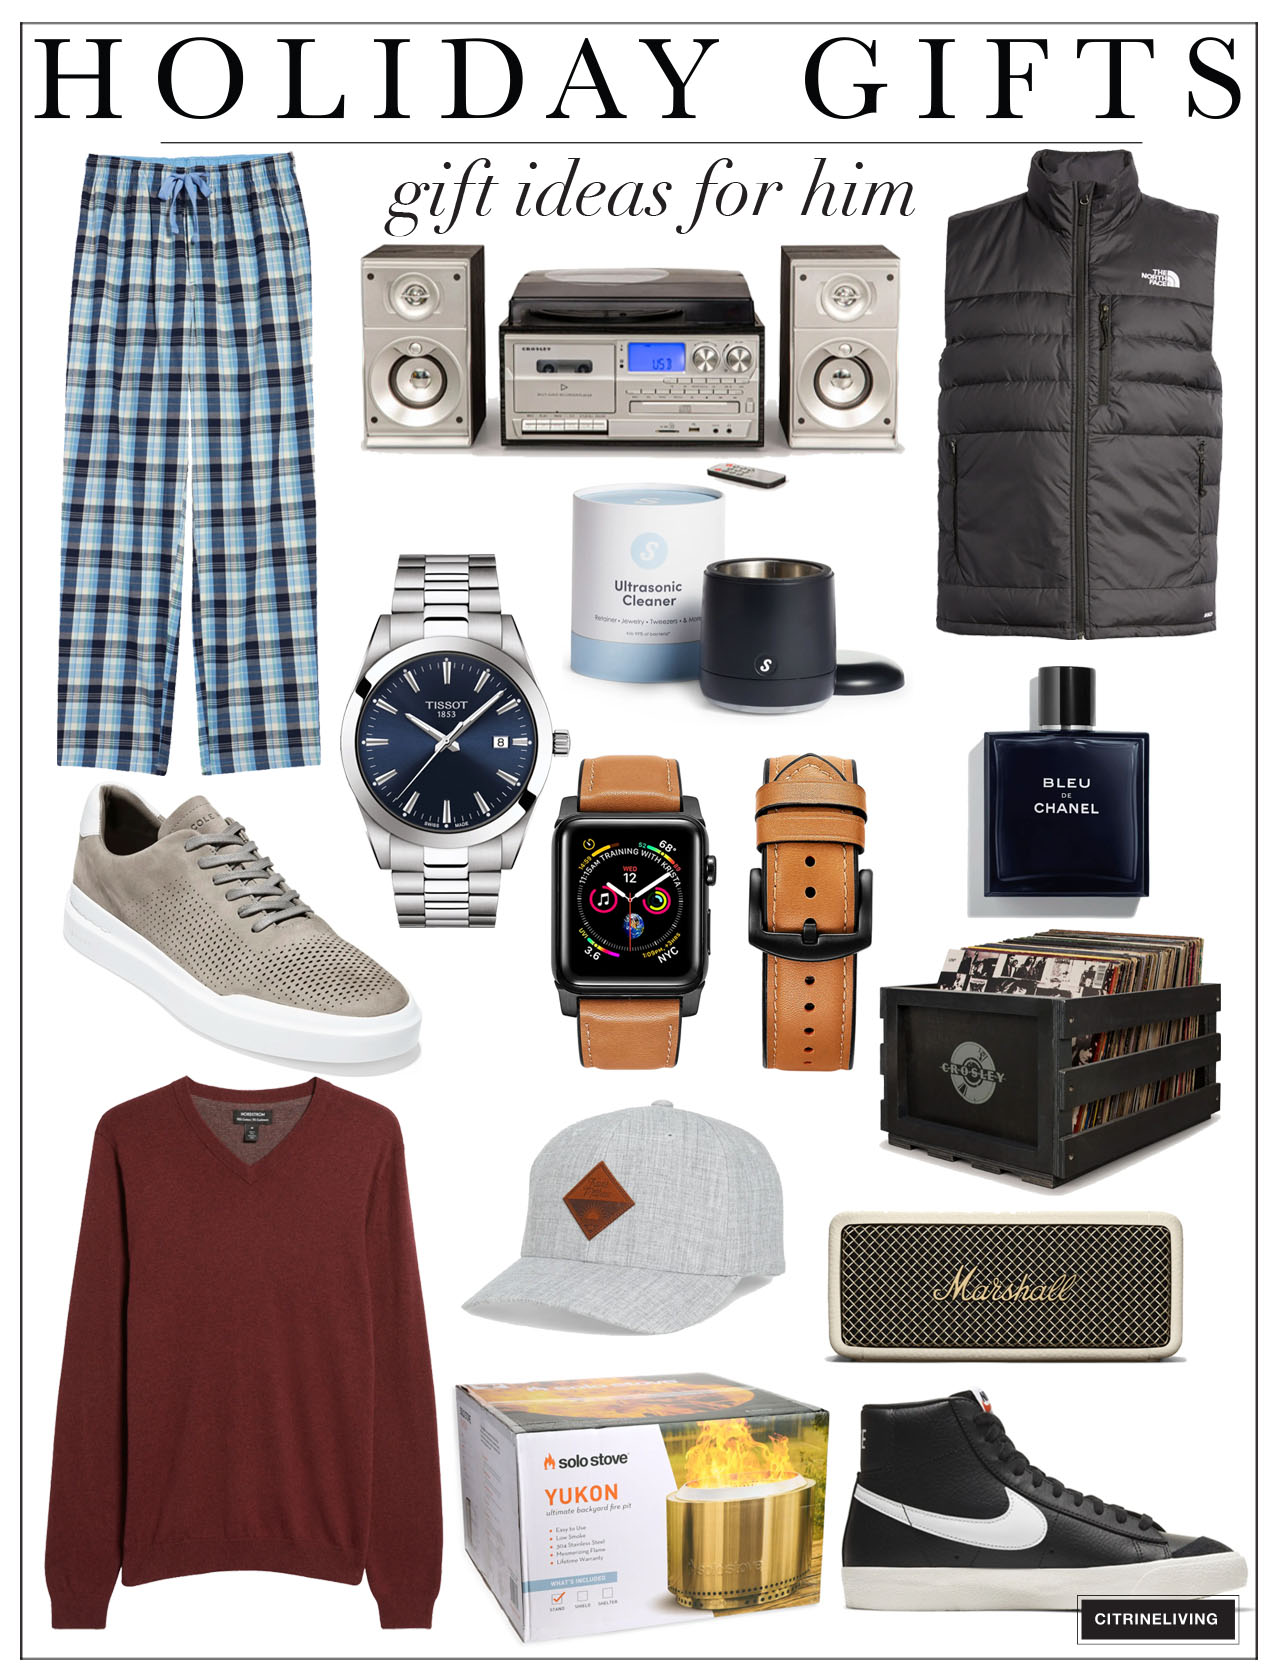 Holiday gifts for him! Pj.s, speakers, watches, shoes, sweaters and more!